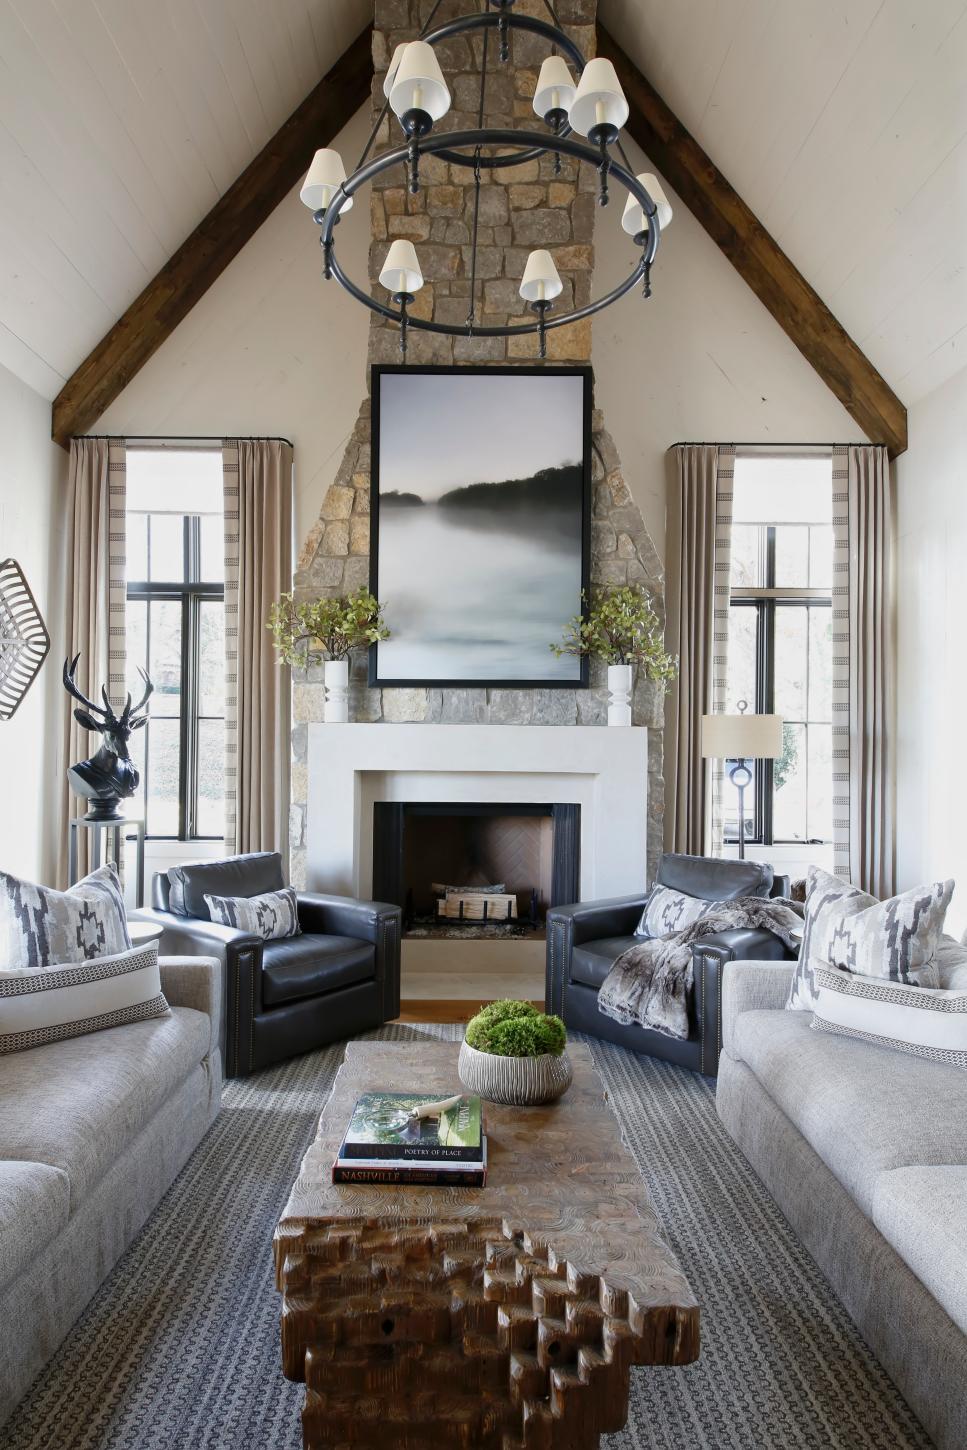 Living Room With Vaulted Ceilings Features a Limestone ...